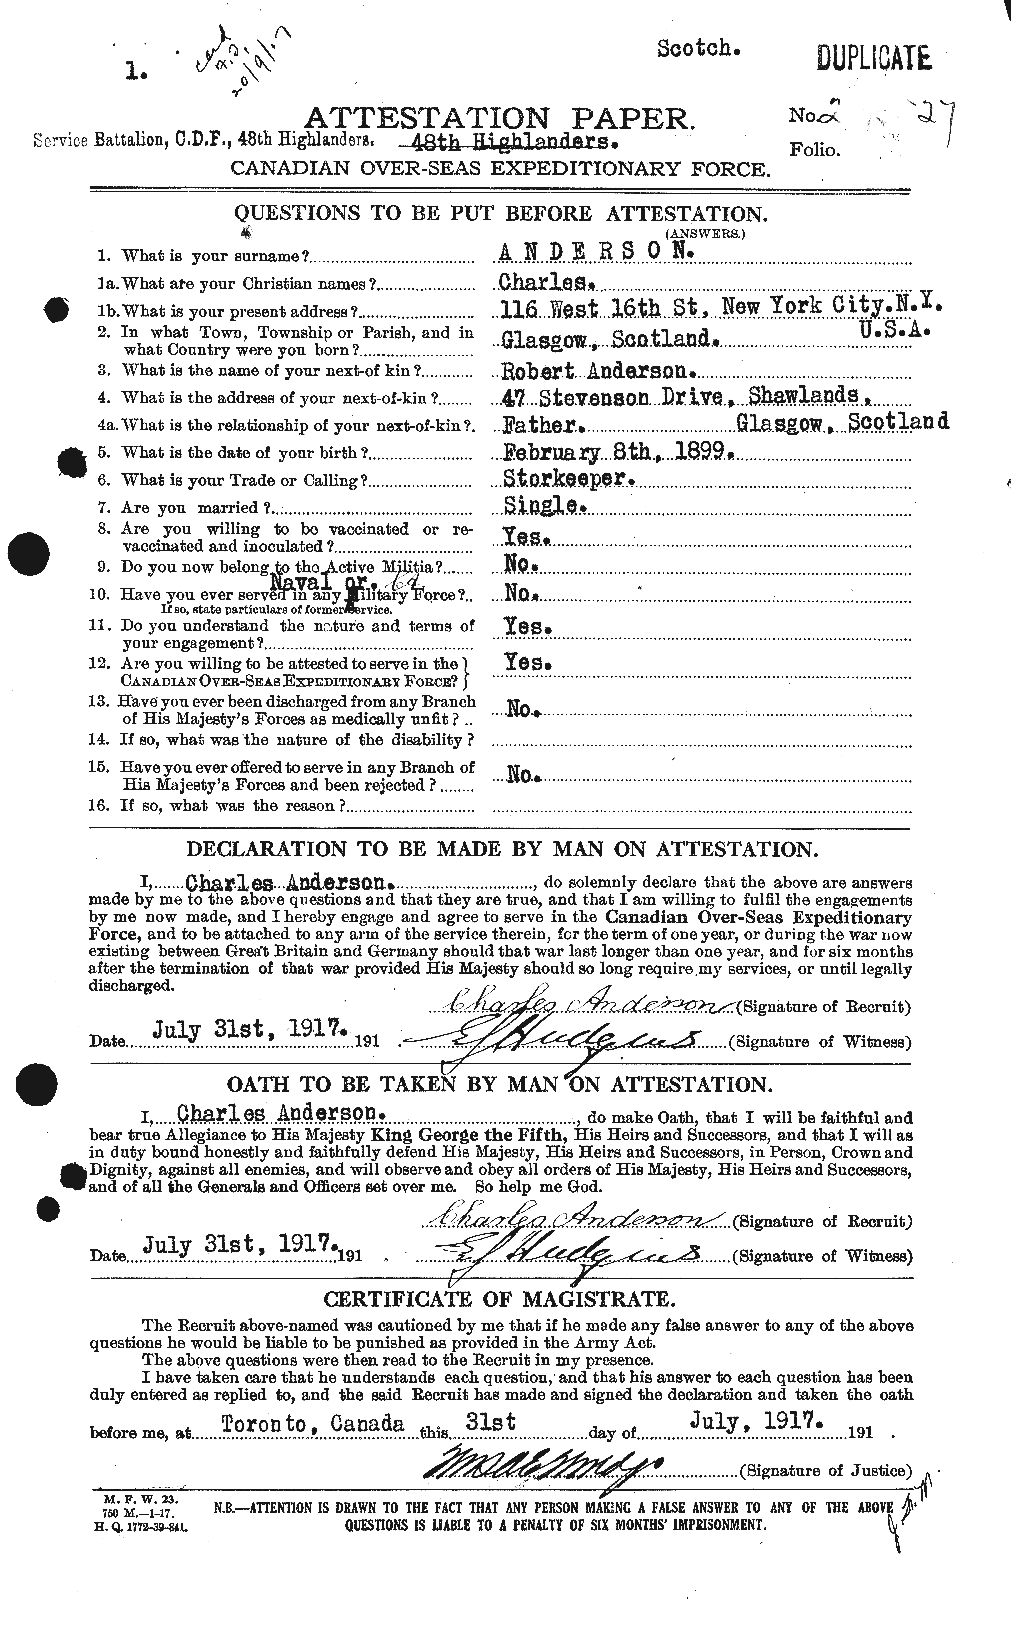 Personnel Records of the First World War - CEF 209264a